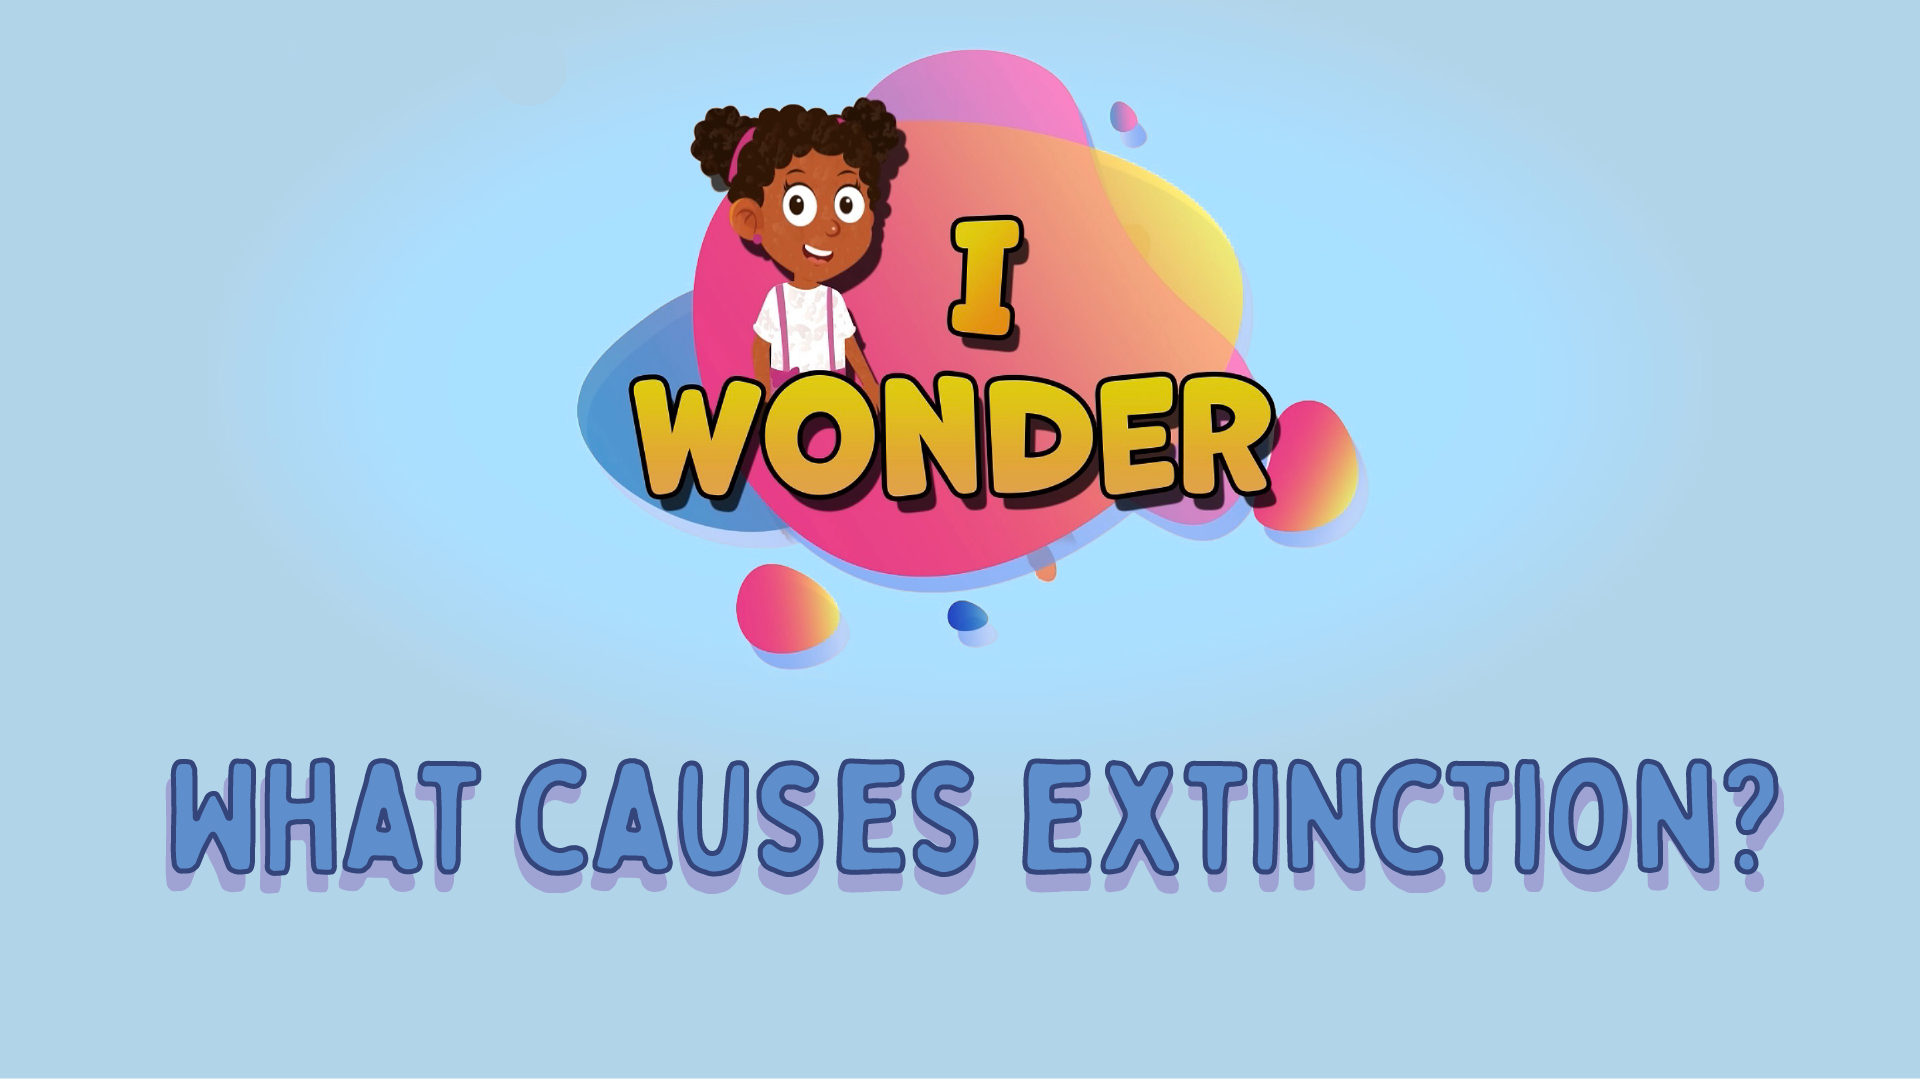 What Causes Extinction?